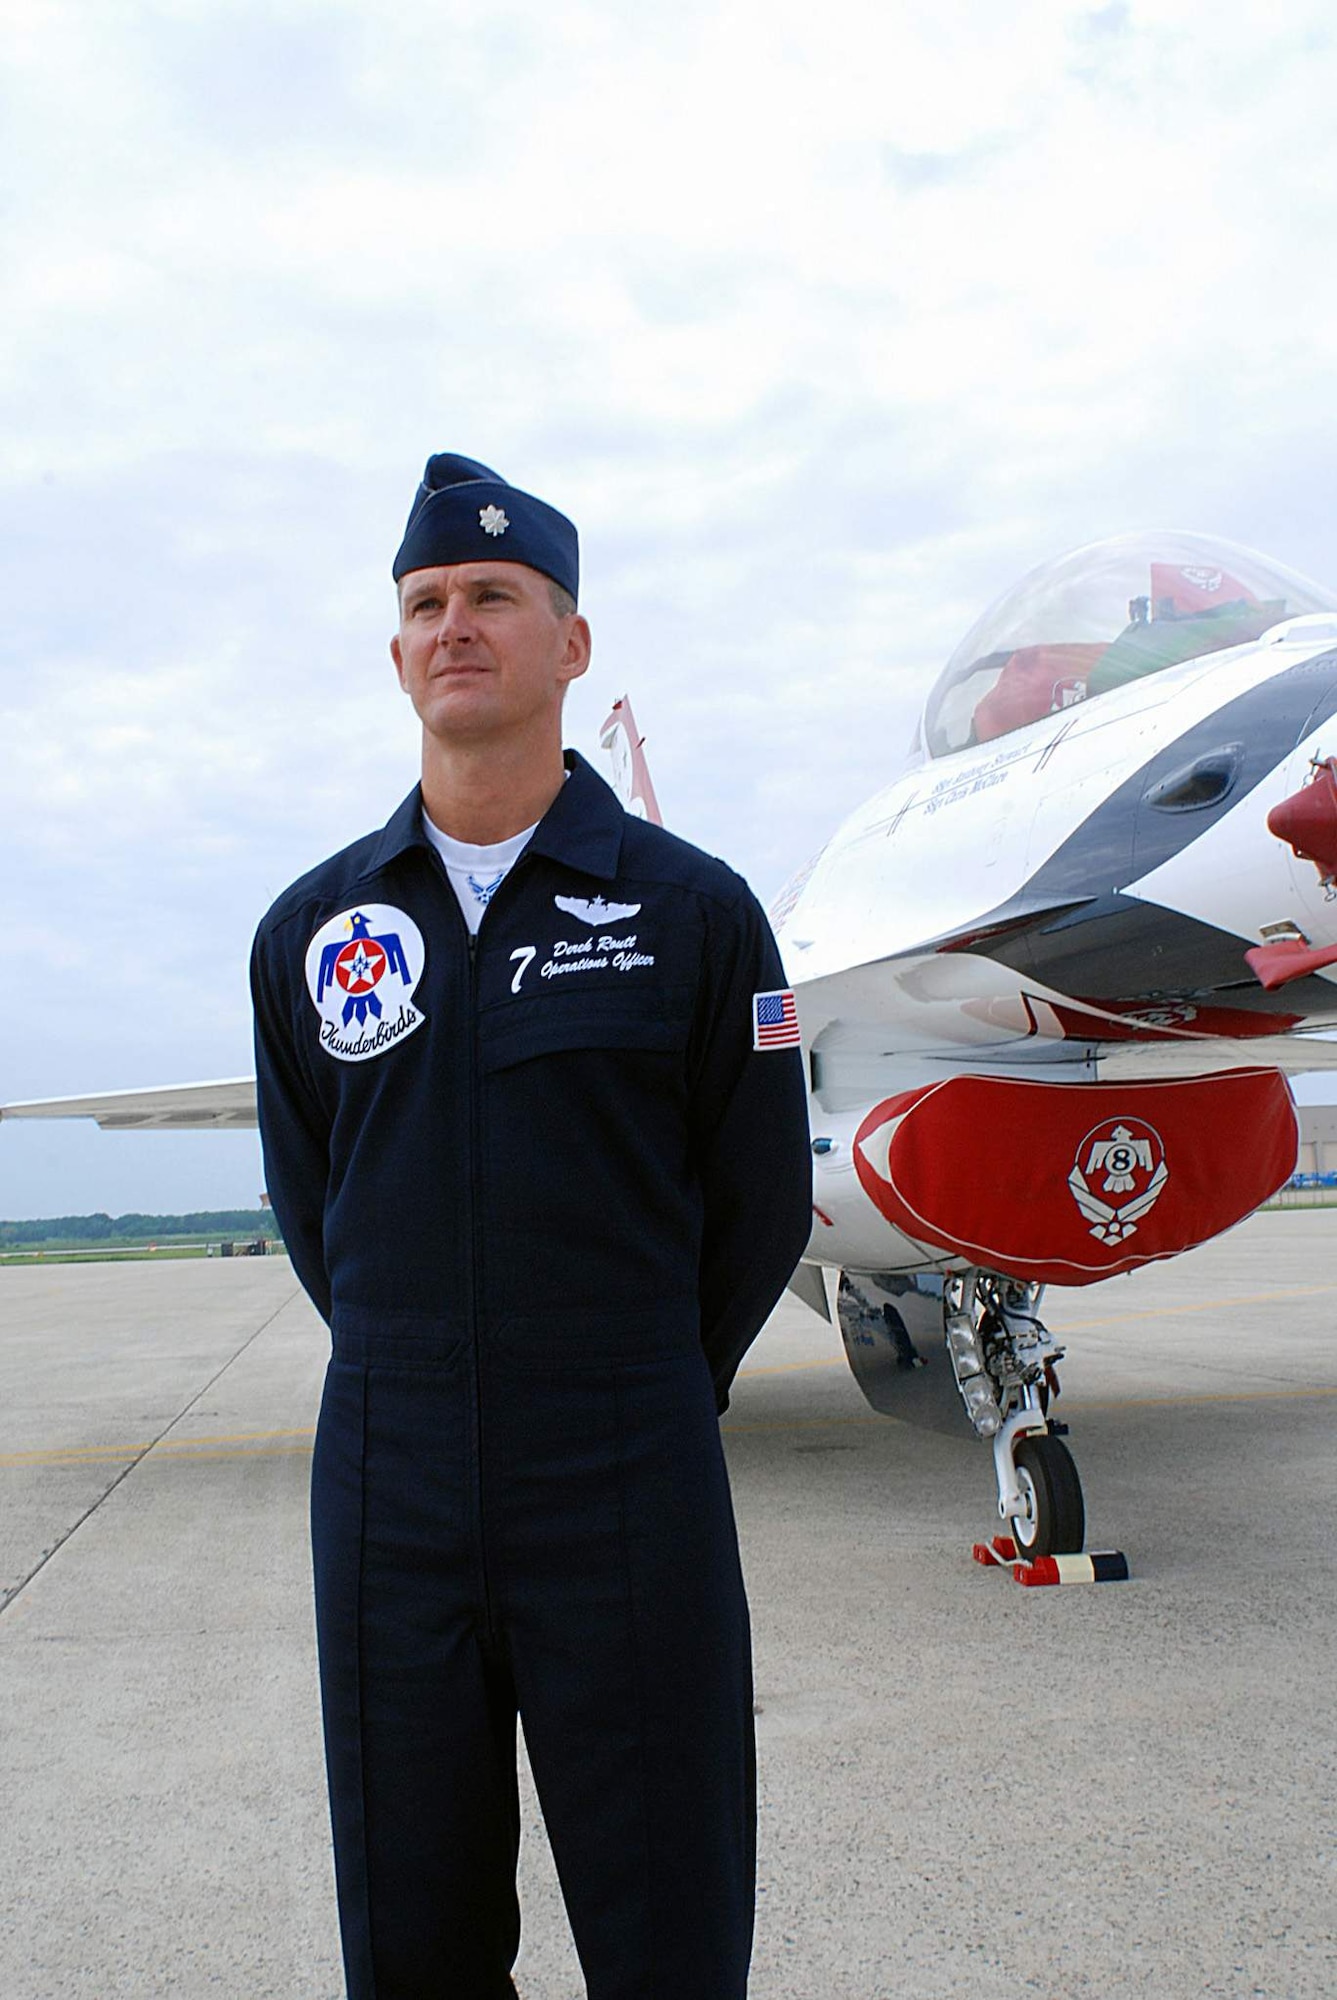 Lt. Col. Derek Routt, "Thunderbird No. 7," looks across the flight line May 14 at Andrews Air Force Base, Md., before an upcoming air show.  Colonel Routt is a Nevada Air National Guard member in his first season as operations officer for the U.S. Air Force Air Demonstration Squadron Thunderbirds.  (U.S. Air Force photo/Master Sgt. Mike R. Smith)